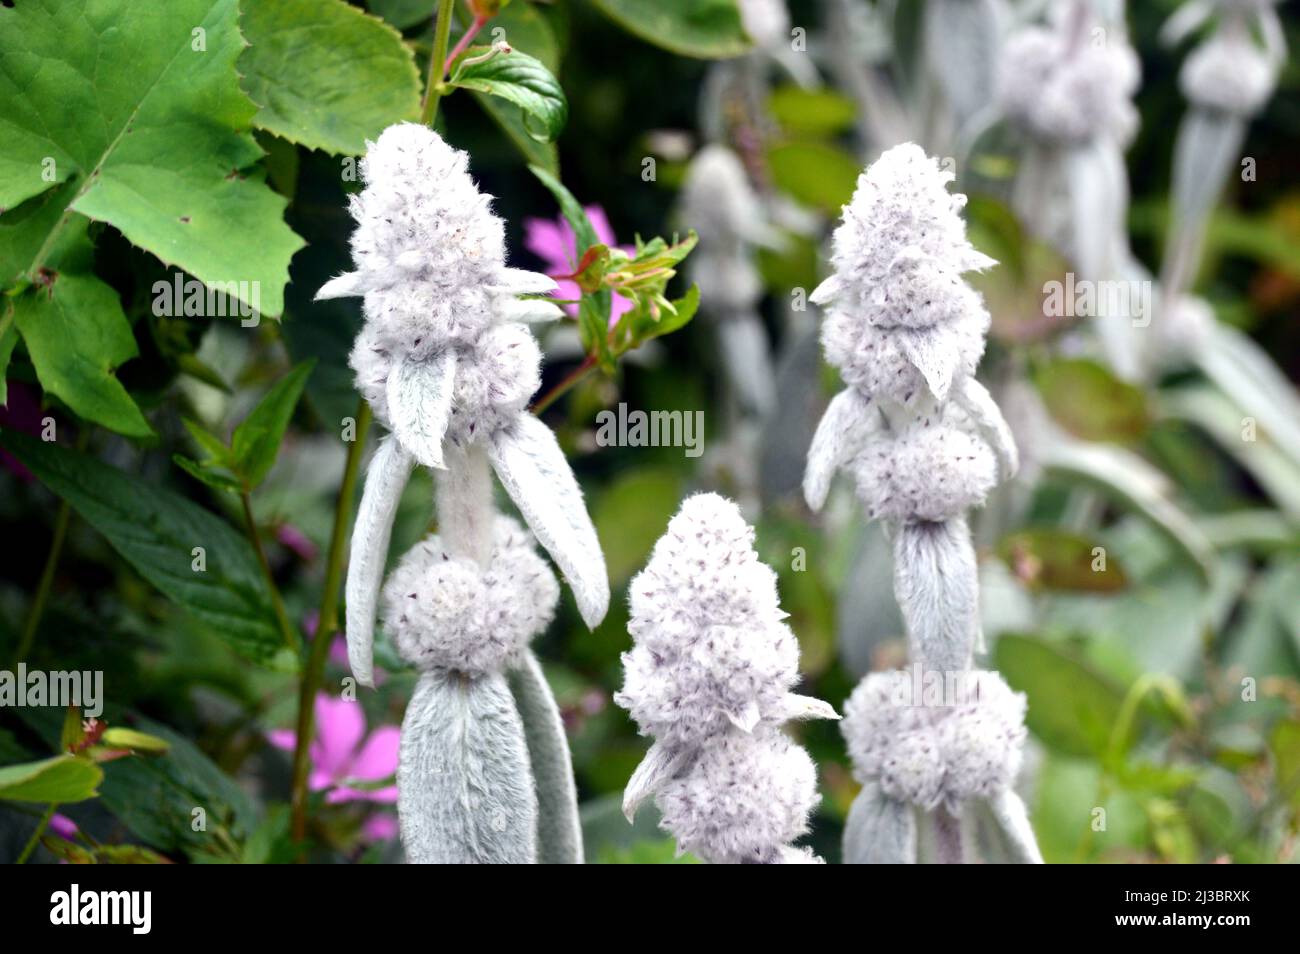 Silver/White Lamb's-ears (Stachys byzantina) 'Woolly woundwort' Flowers grown at Holker Hall & Gardens, Lake District, Cumbria, England, UK. Stock Photo